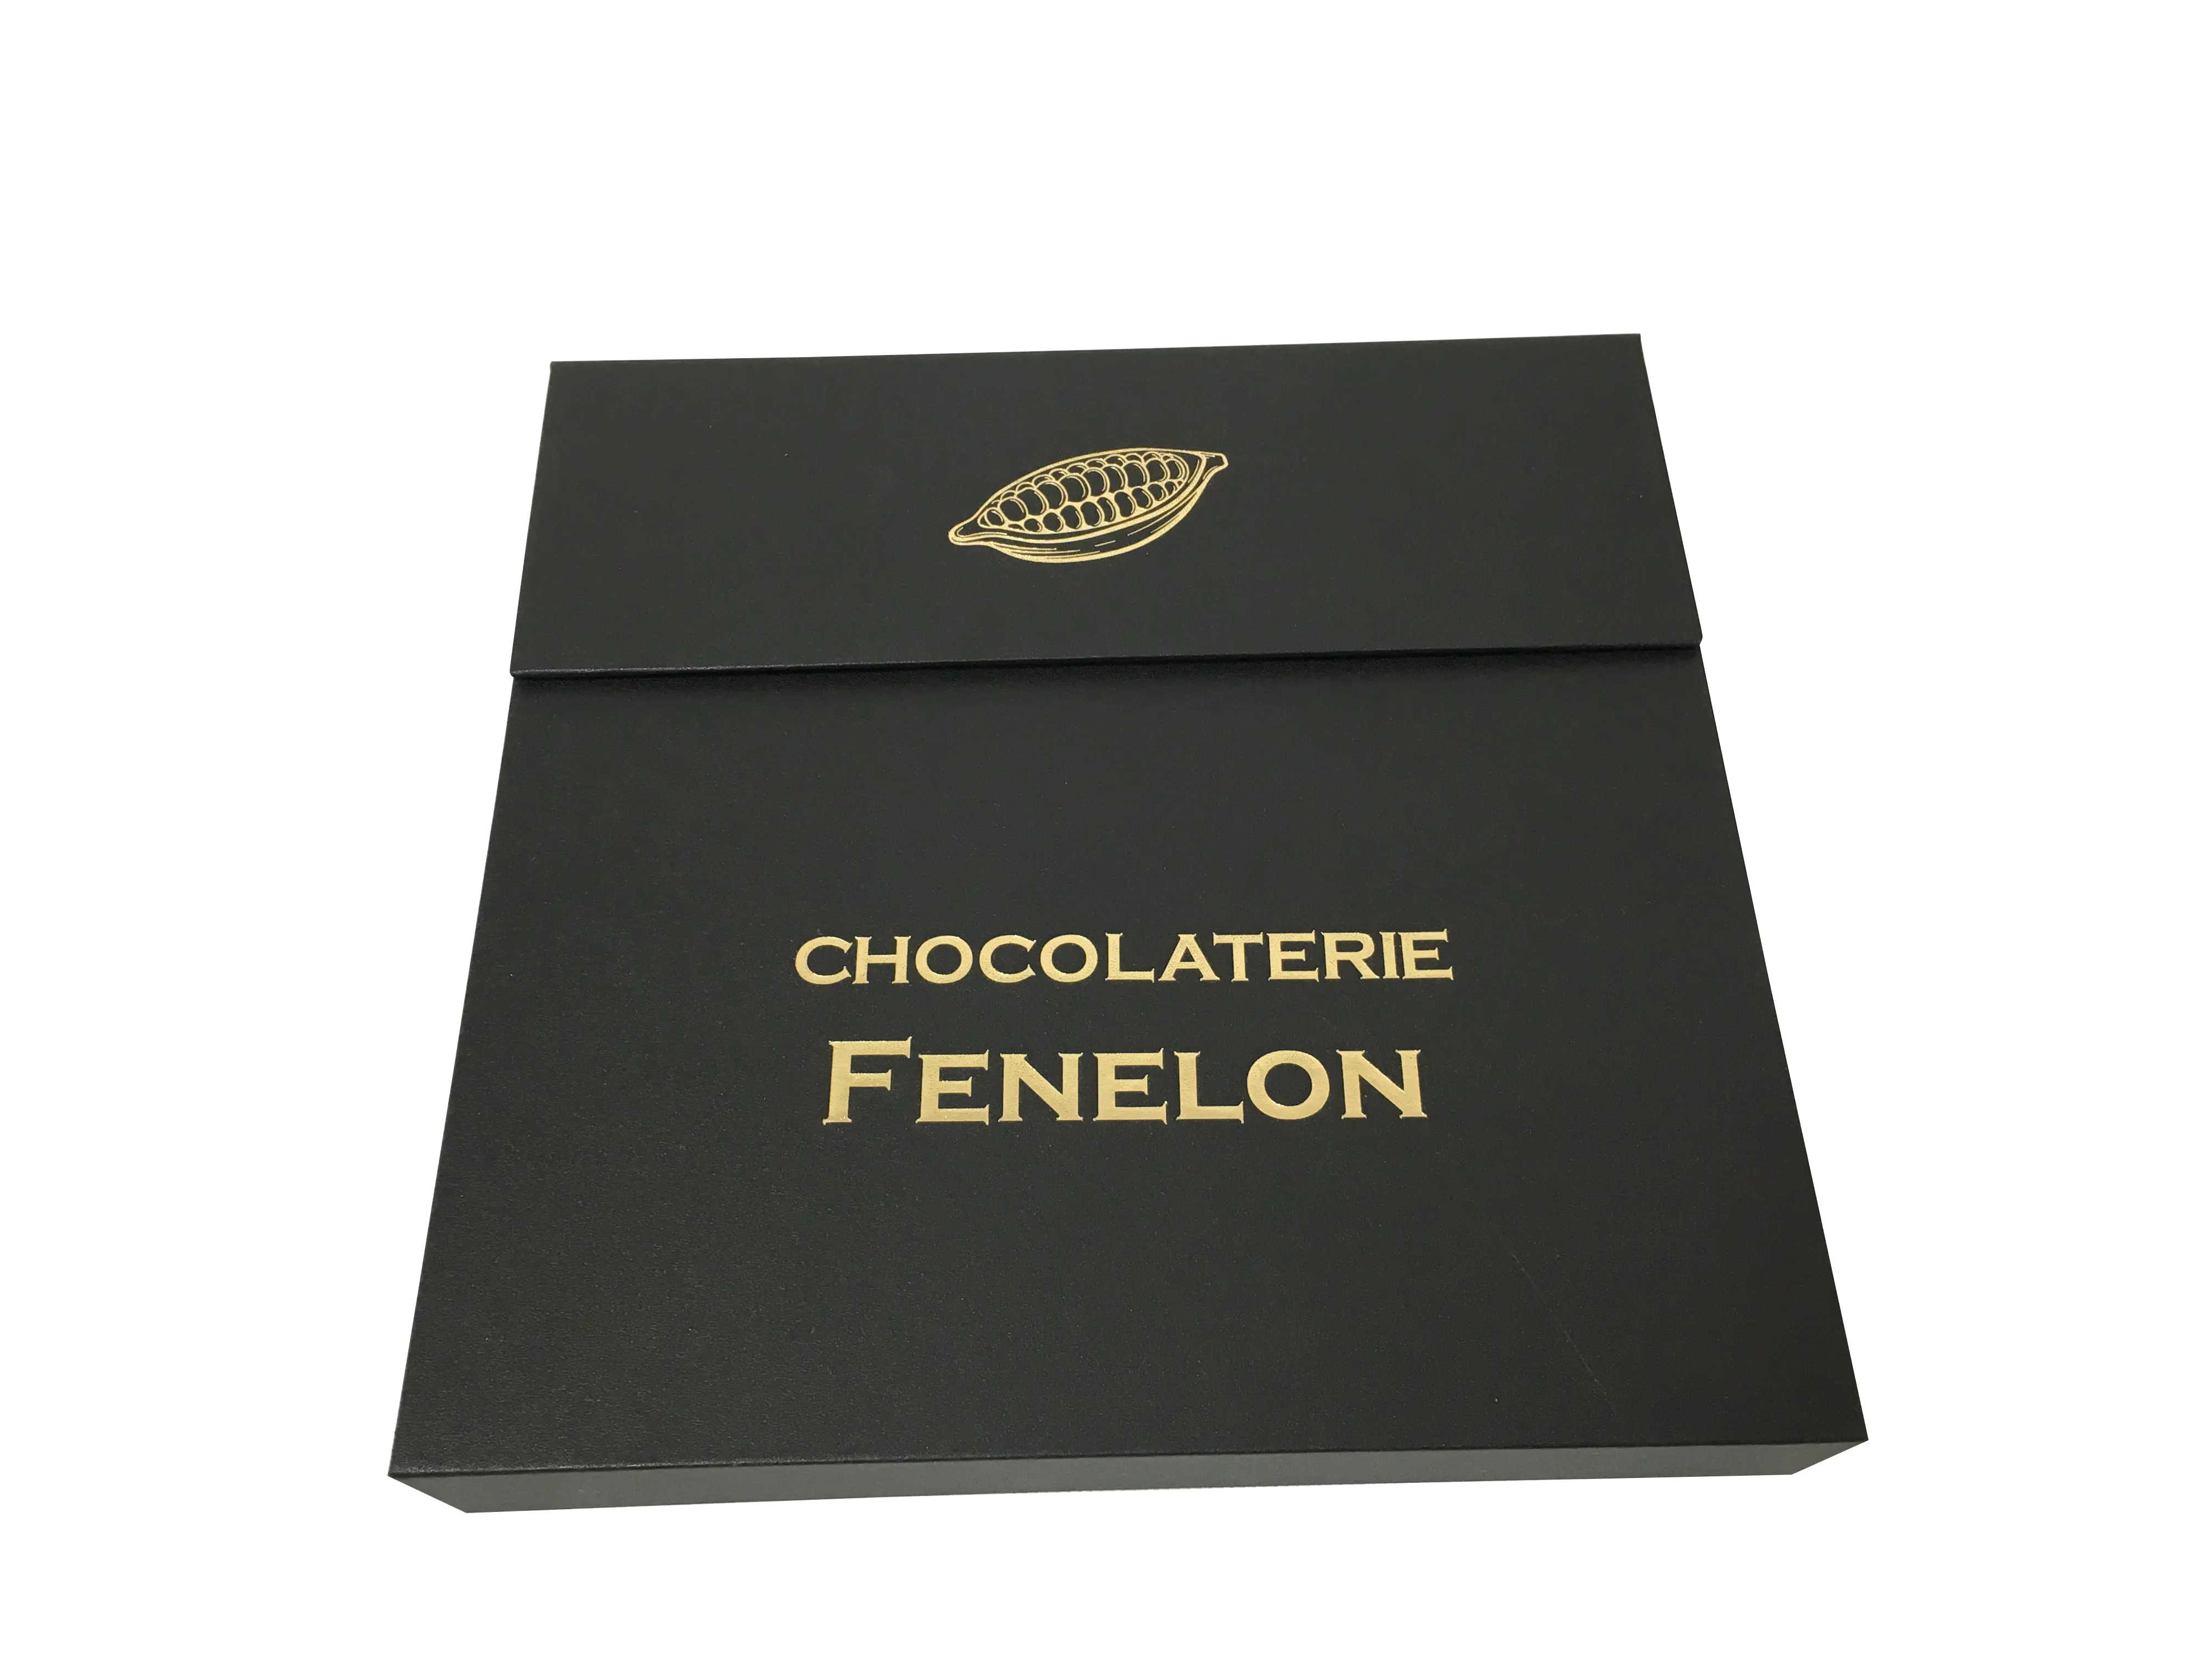 36 pcs load chocolate box hand made luxury chocolate box rigid chocolate box chocolate gift box with paper divider 